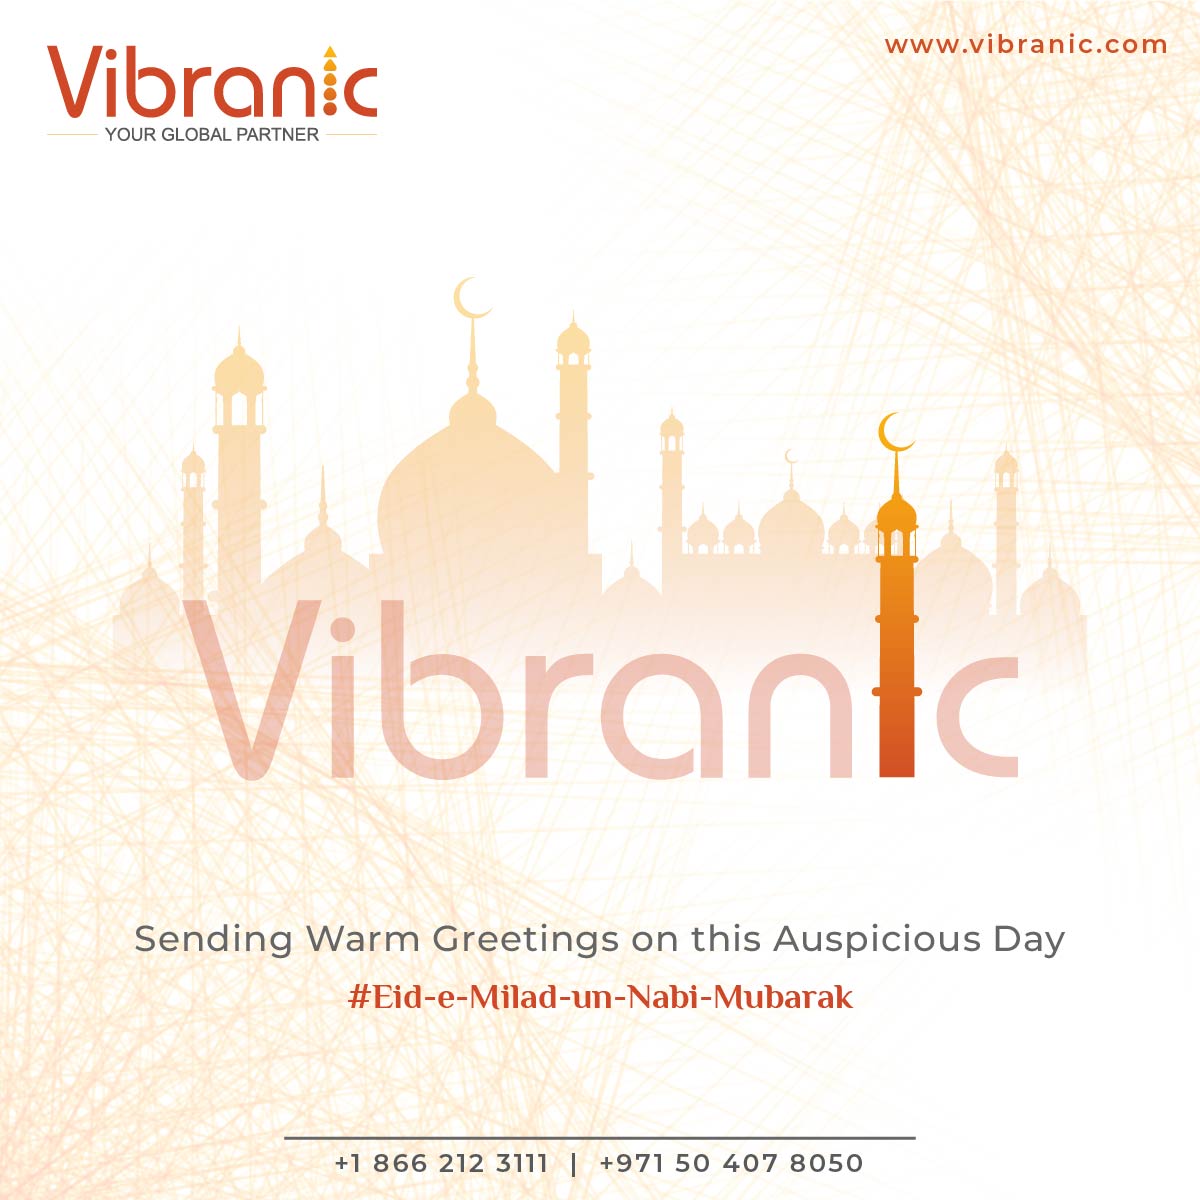 On this auspicious day of Eid Milad un Nabi, may your heart be filled with gratitude and your life be illuminated with the divine blessings of Allah. Eid Milad un Nabi Mubarak!

#Vibranic #GlobalPartner #VibranicDesigns #EidMiladunNabi #MiladunNabiMubarak #eid2023